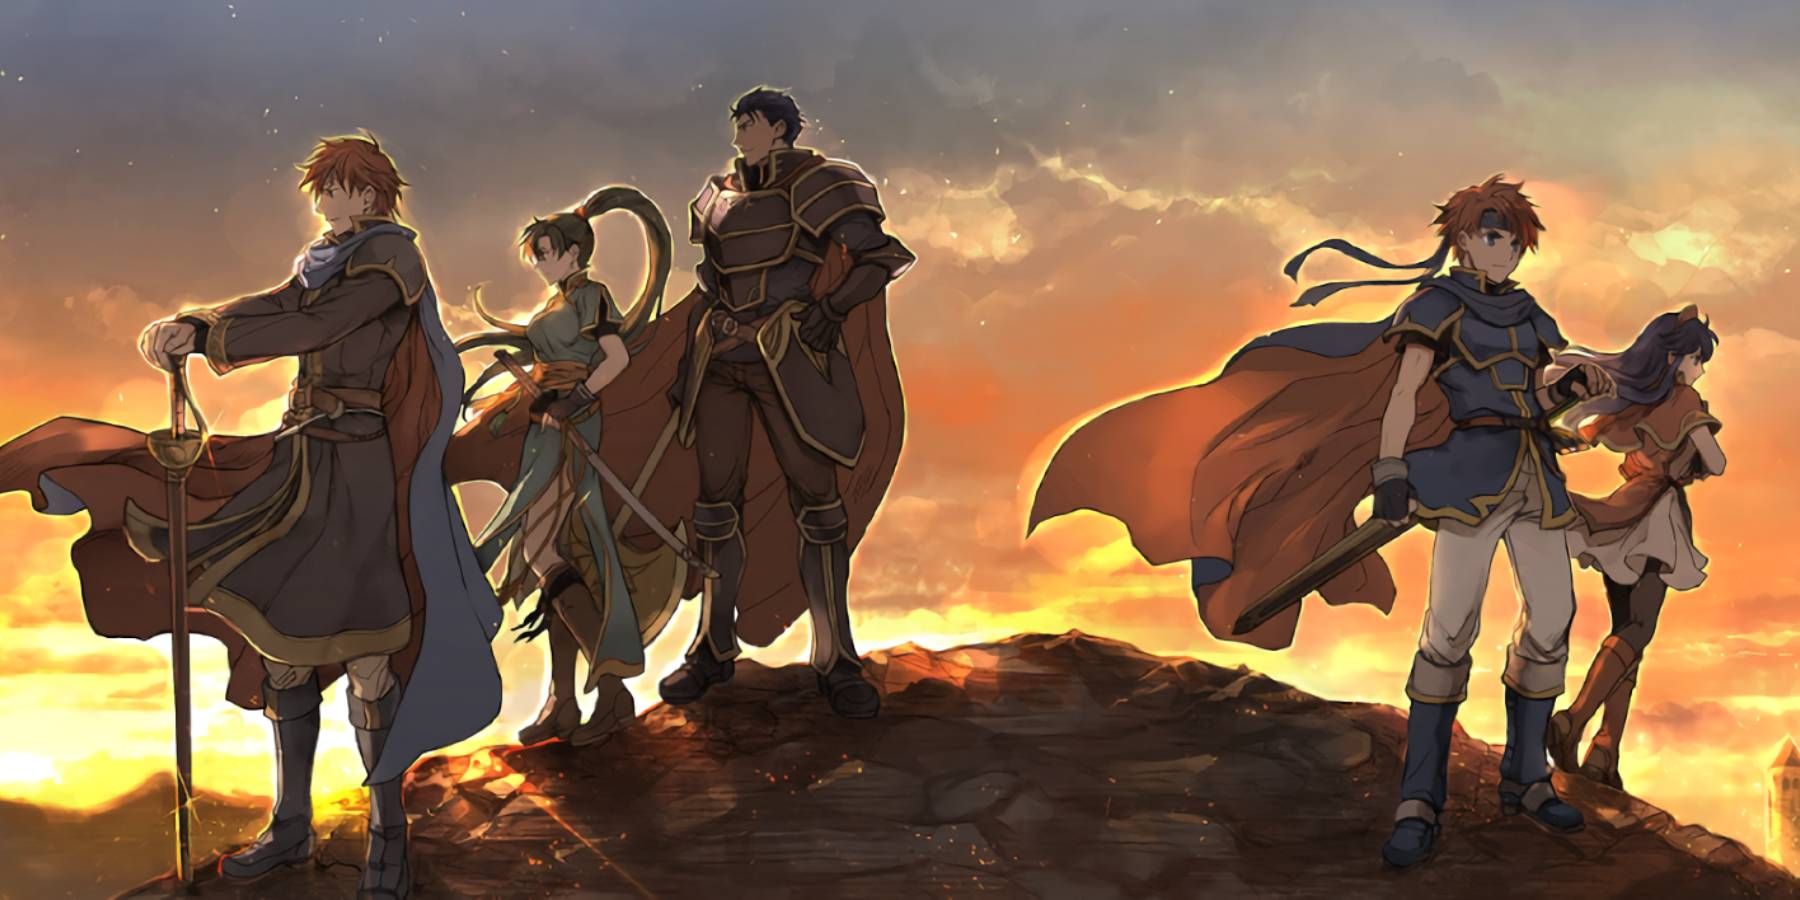 Artwork from the soundtrack for Fire Emblem: The Binding Blade and The Blazing Blade